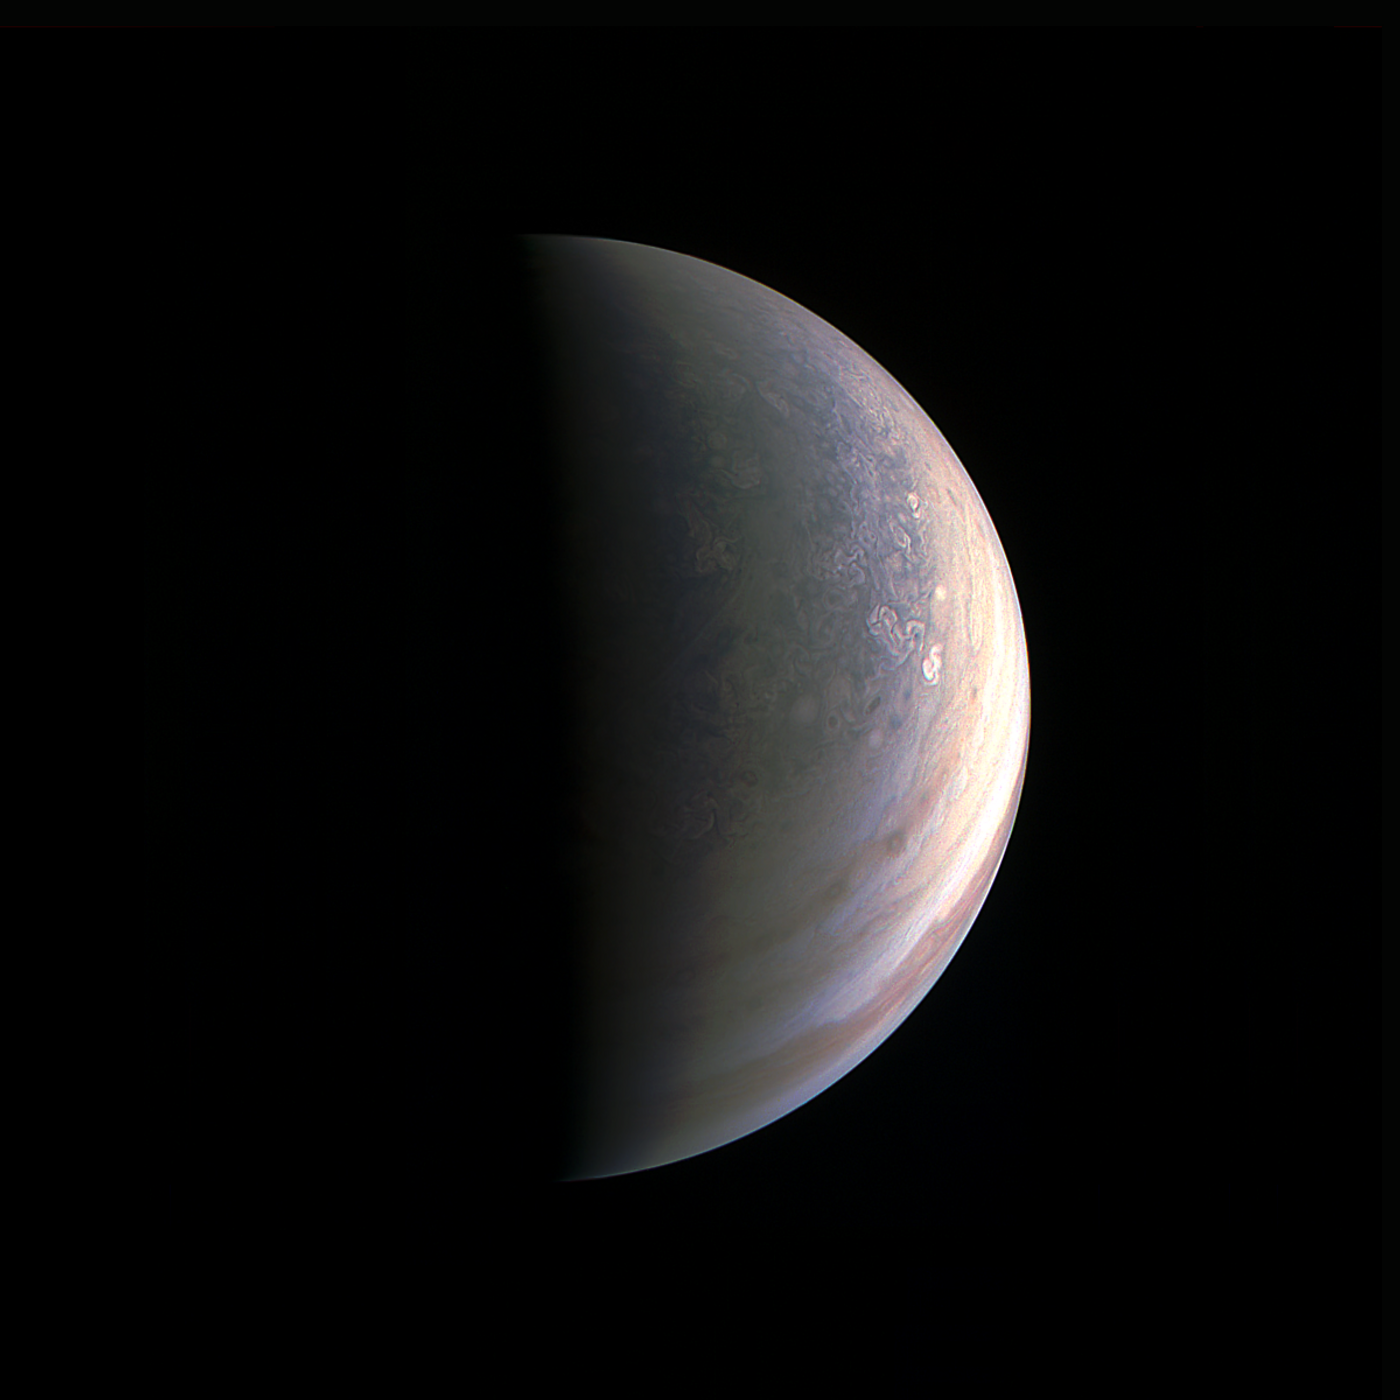 Jupiter's North Pole as photographed from the Juno spacecraft.